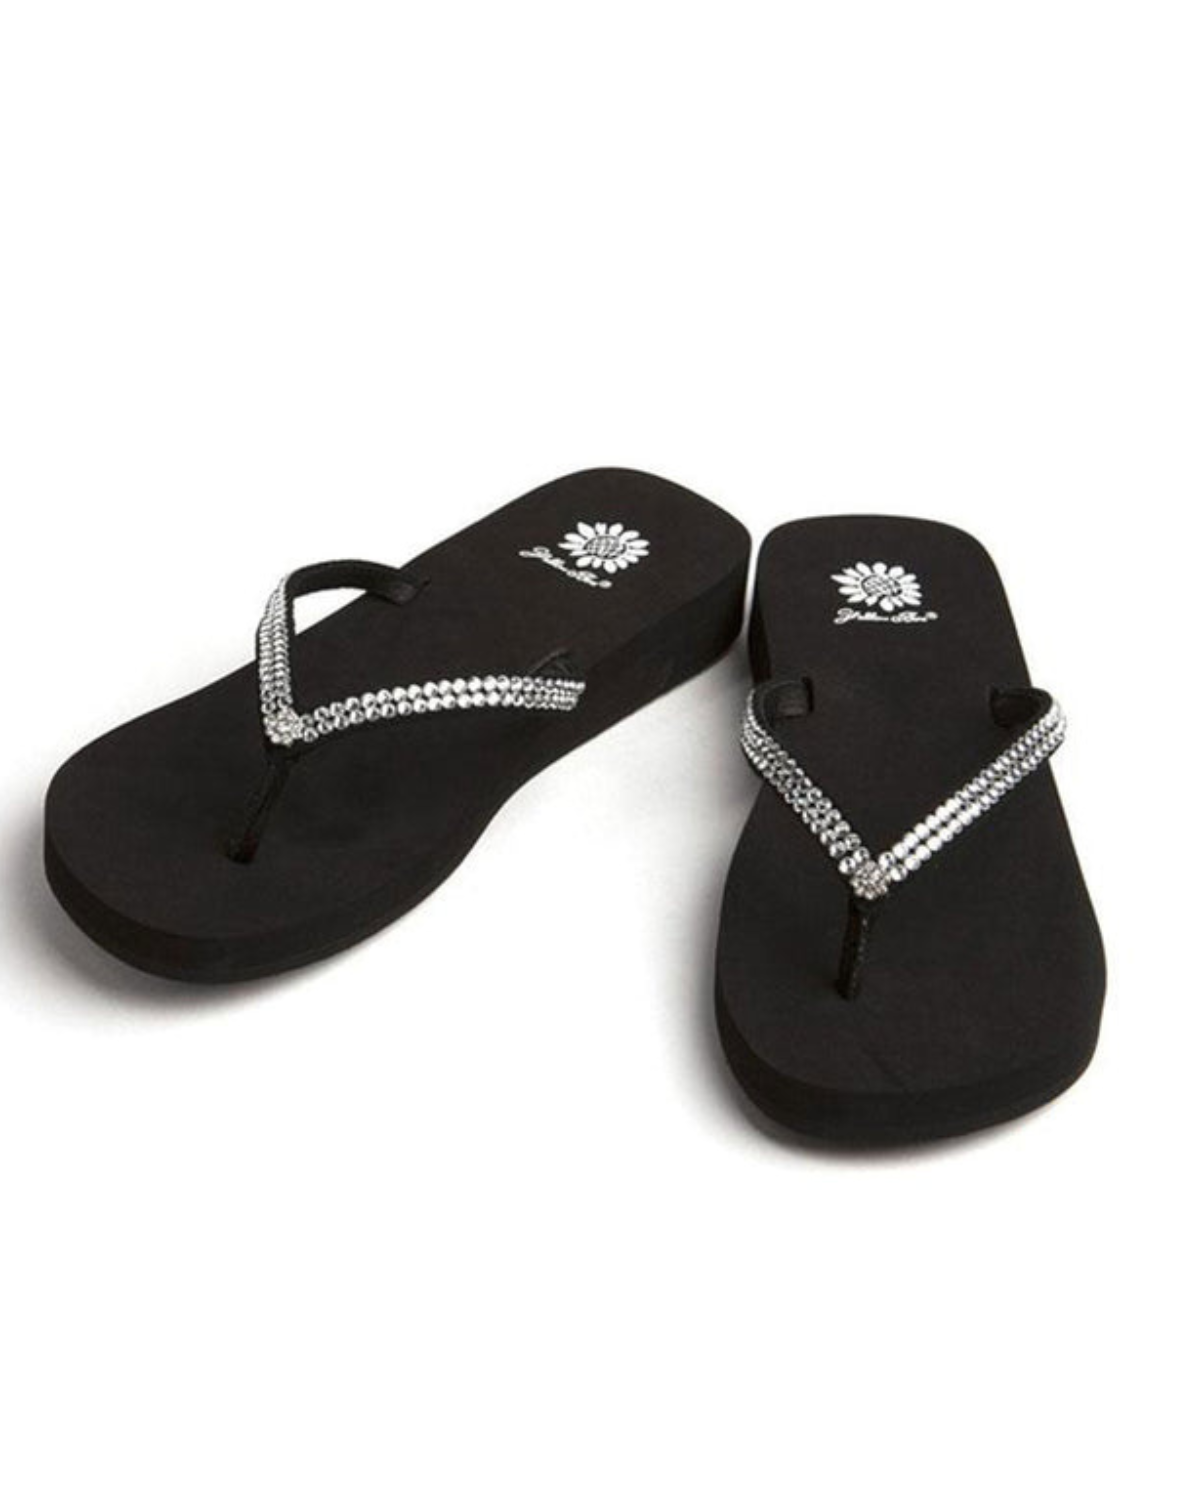 Women's black wedge sandal with rhinestones on the strap.